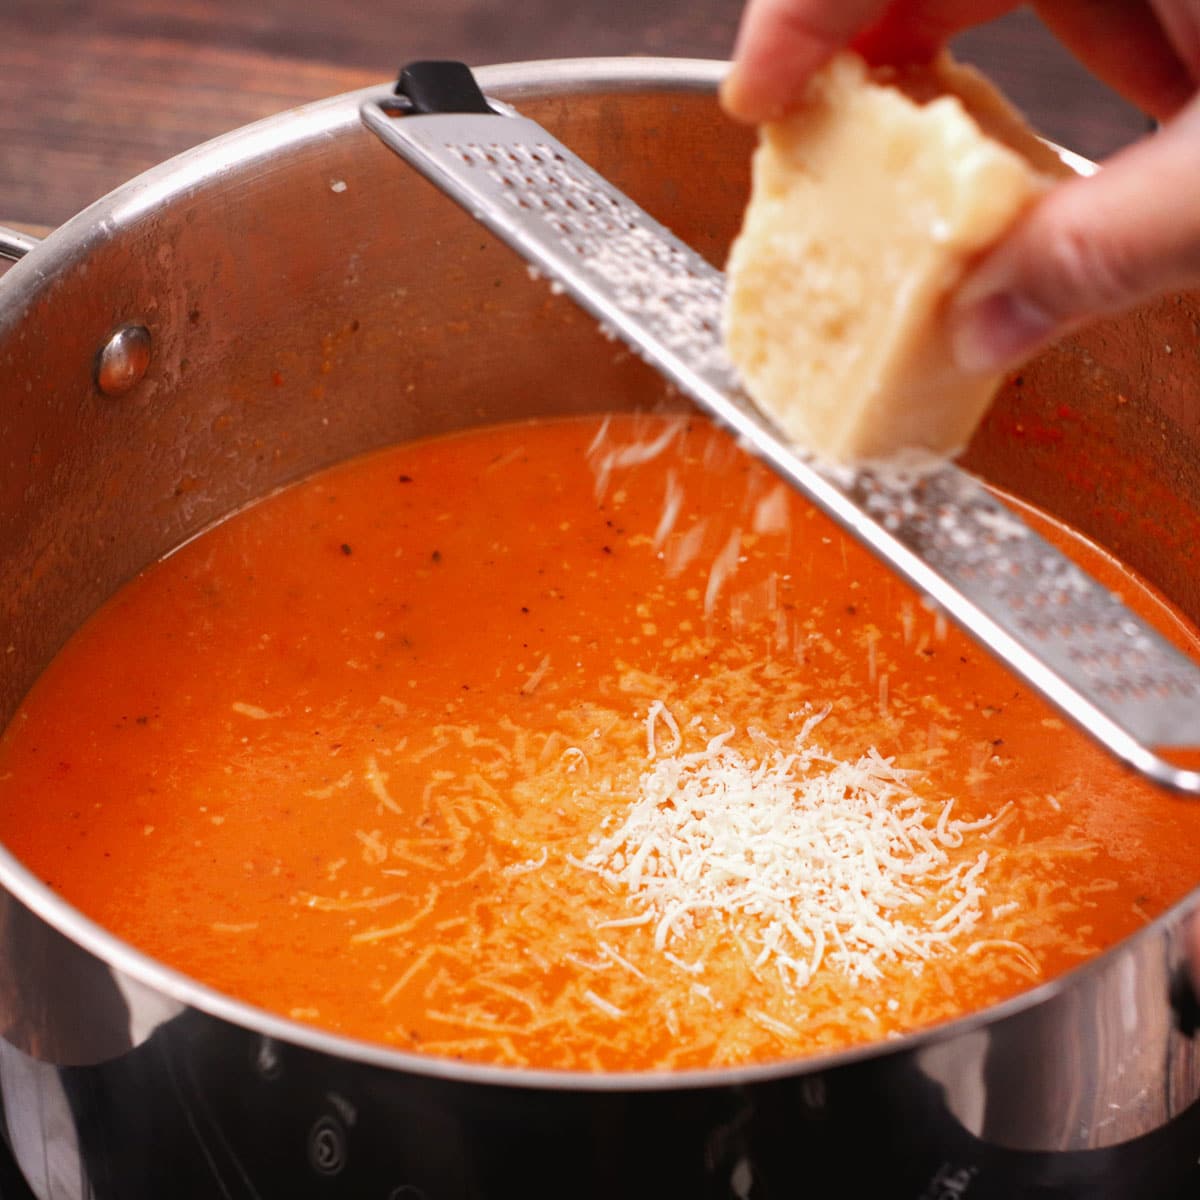 Adding Parmesan cheese to the tomato soup while it's cooking in the pot.